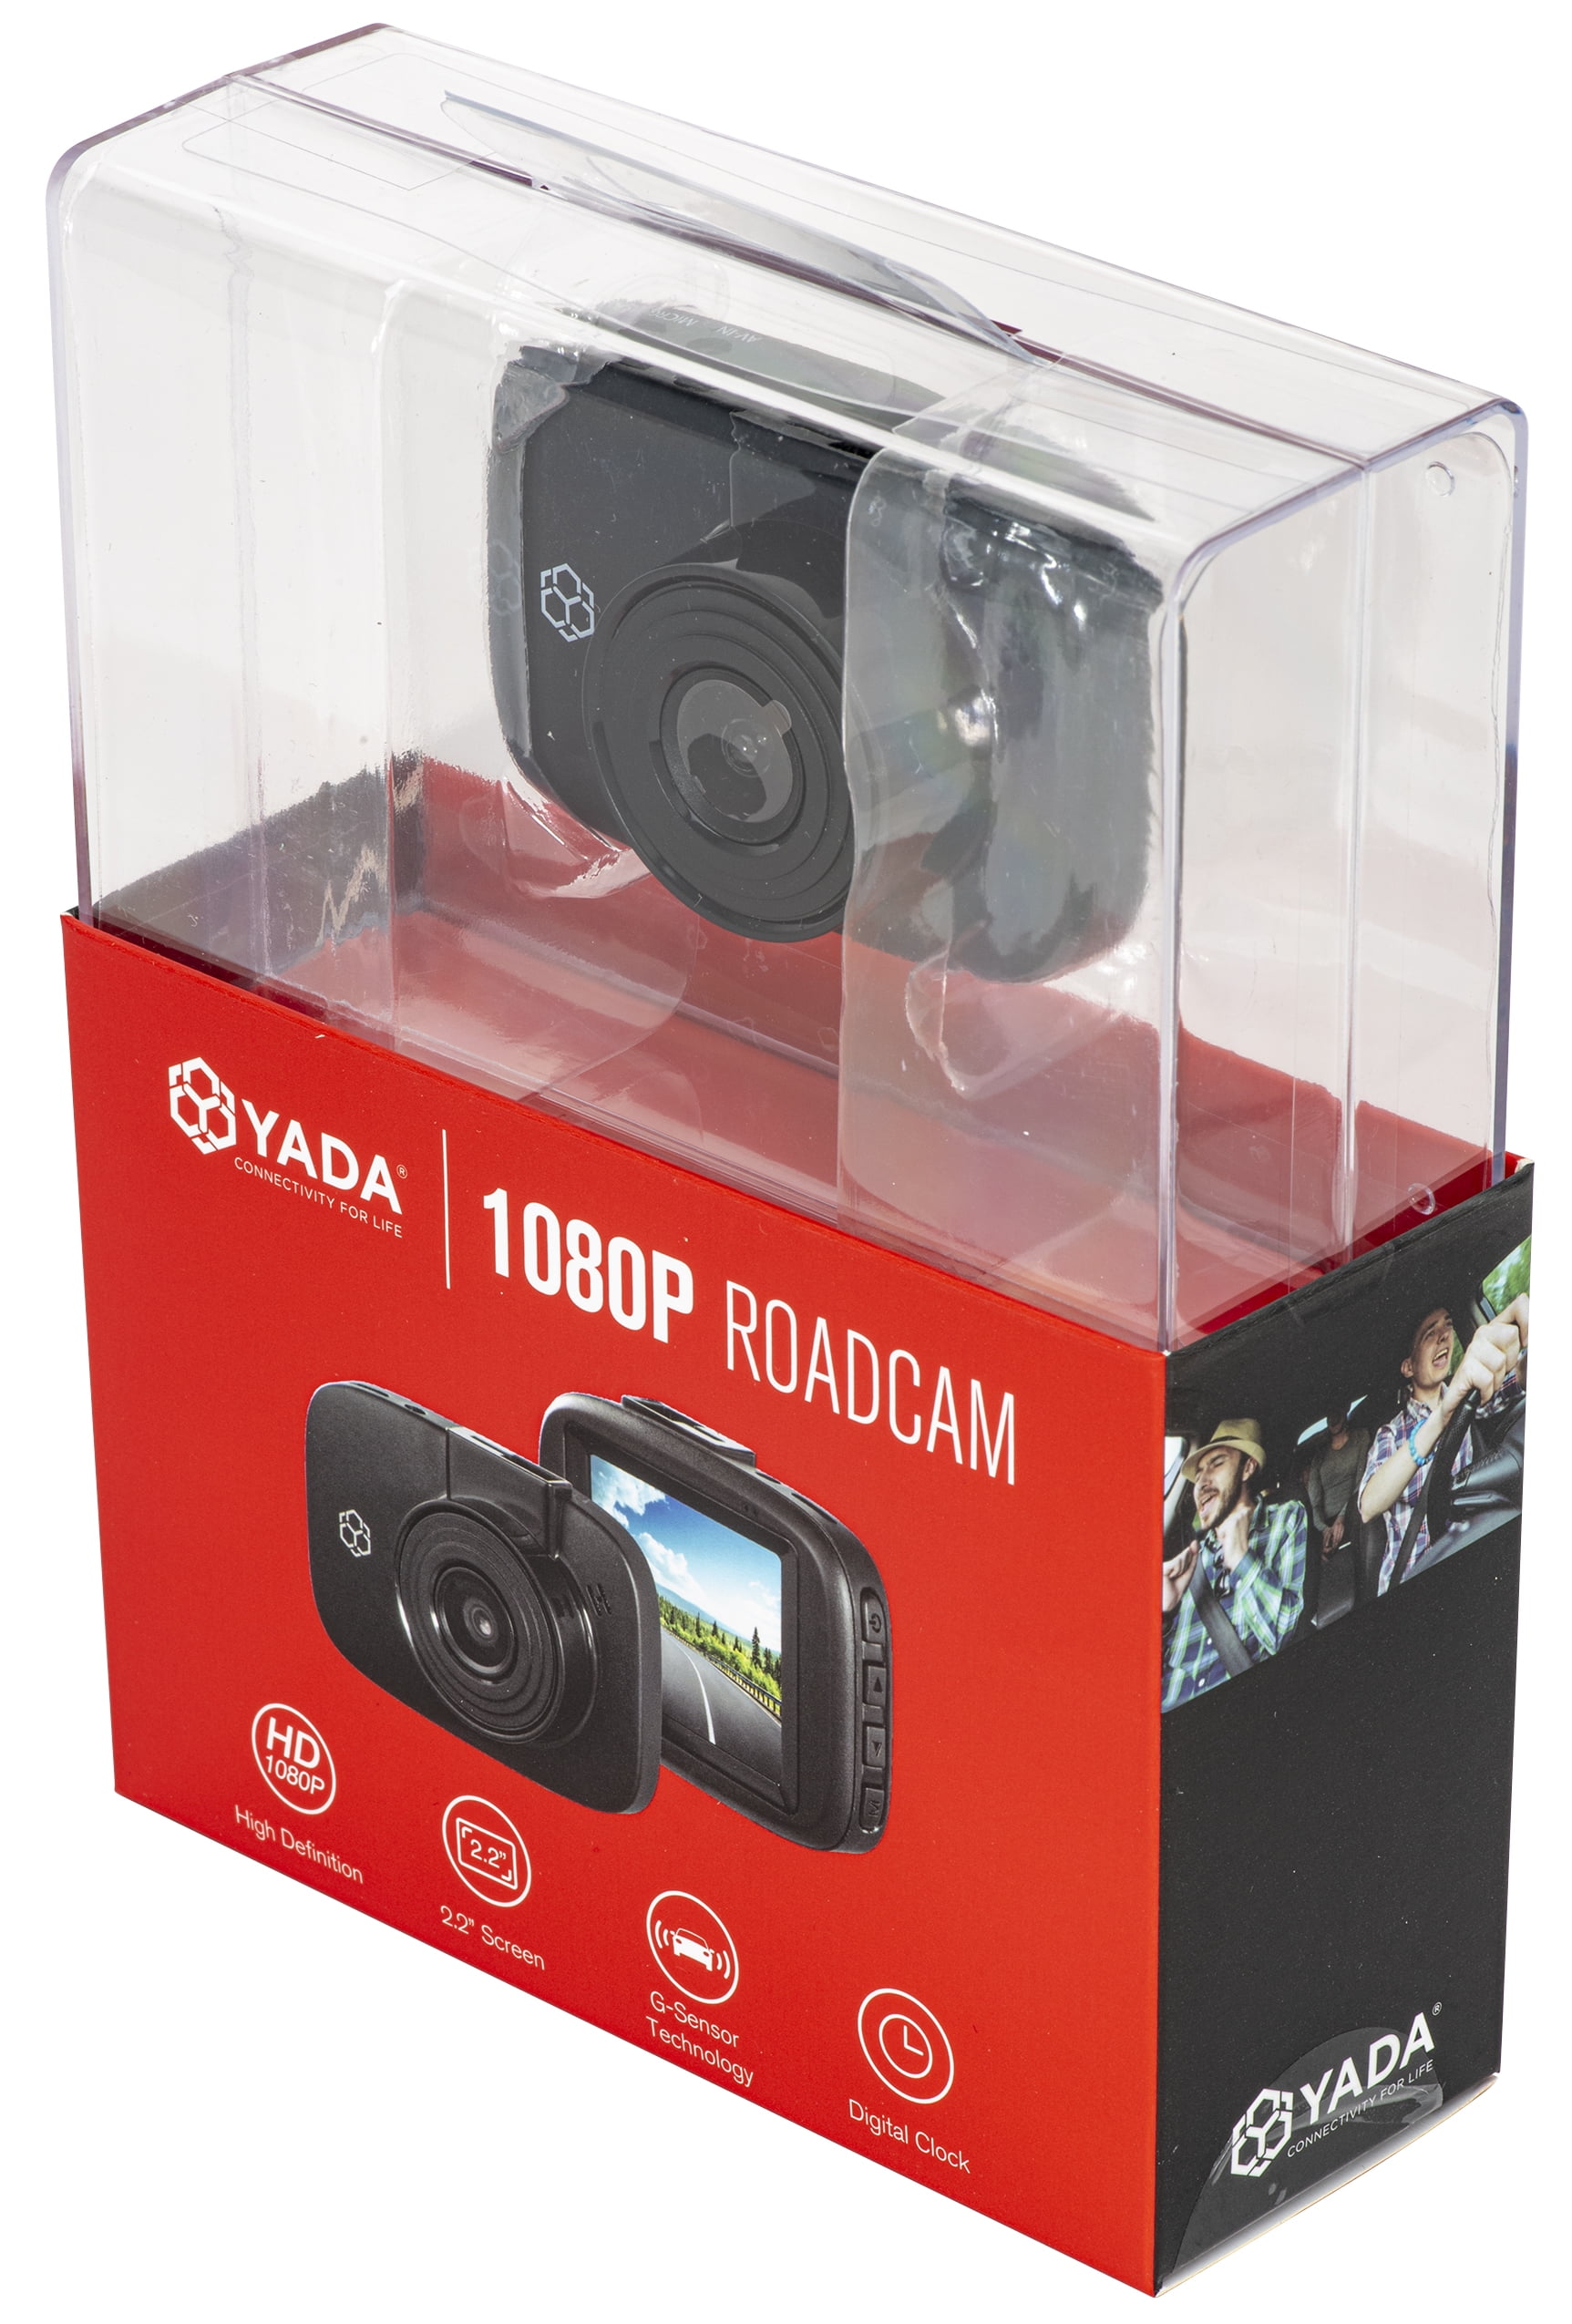 YADA 1080p Roadcam 120 Degree Wide Angle Lense, 2.2" LCD screen, G-Sensor Technology with Park and Record Mode, Loop Recording